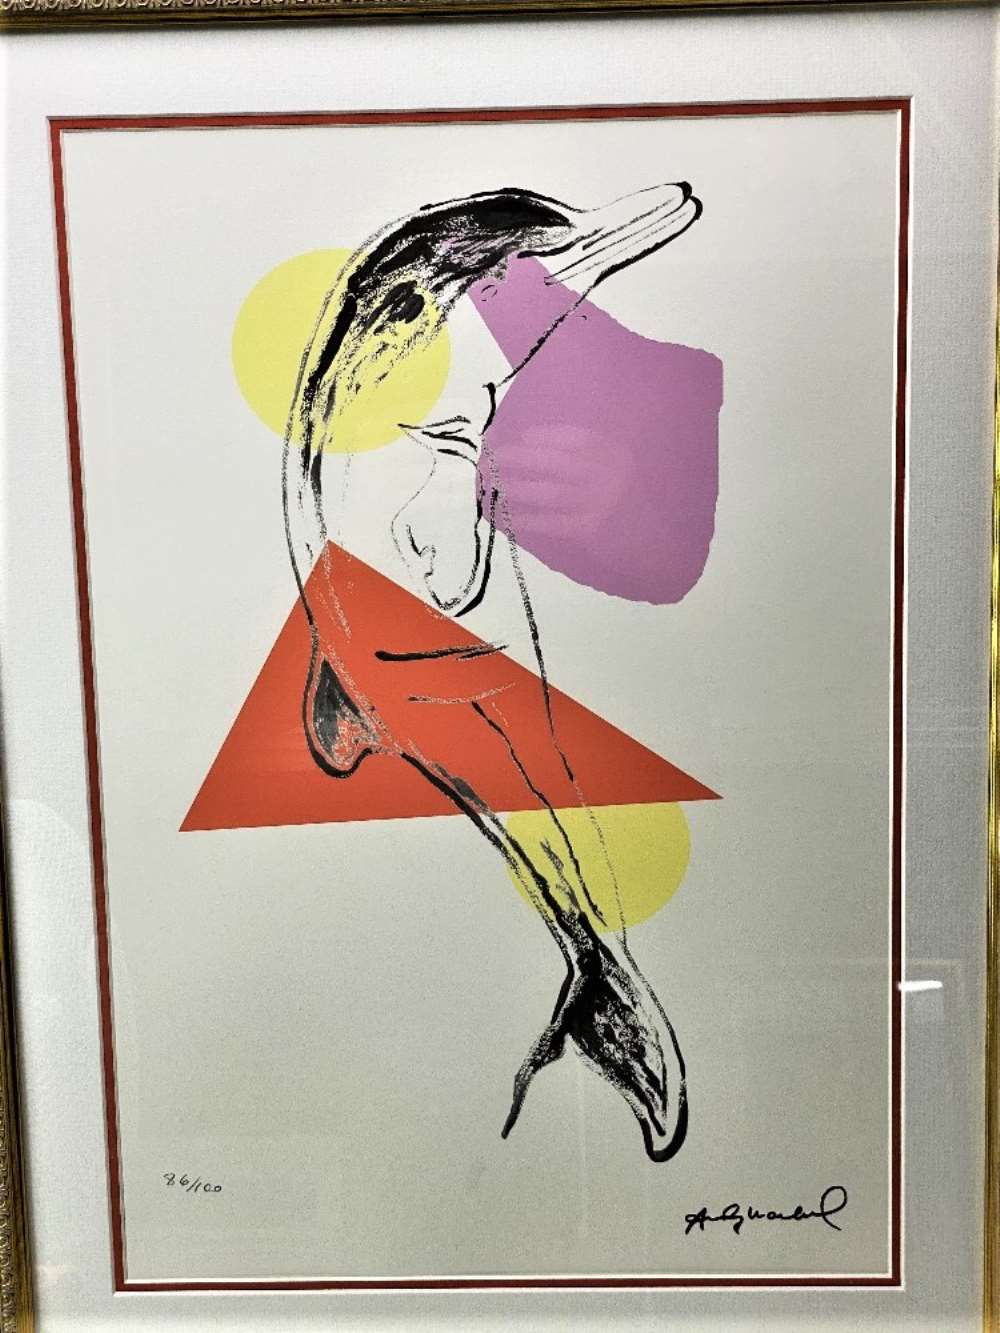 Andy Warhol (1928-1987) "Dolphin" Leo Castelli- New York Numbered Ltd Edition of #86/100 Lithograph, - Image 2 of 6